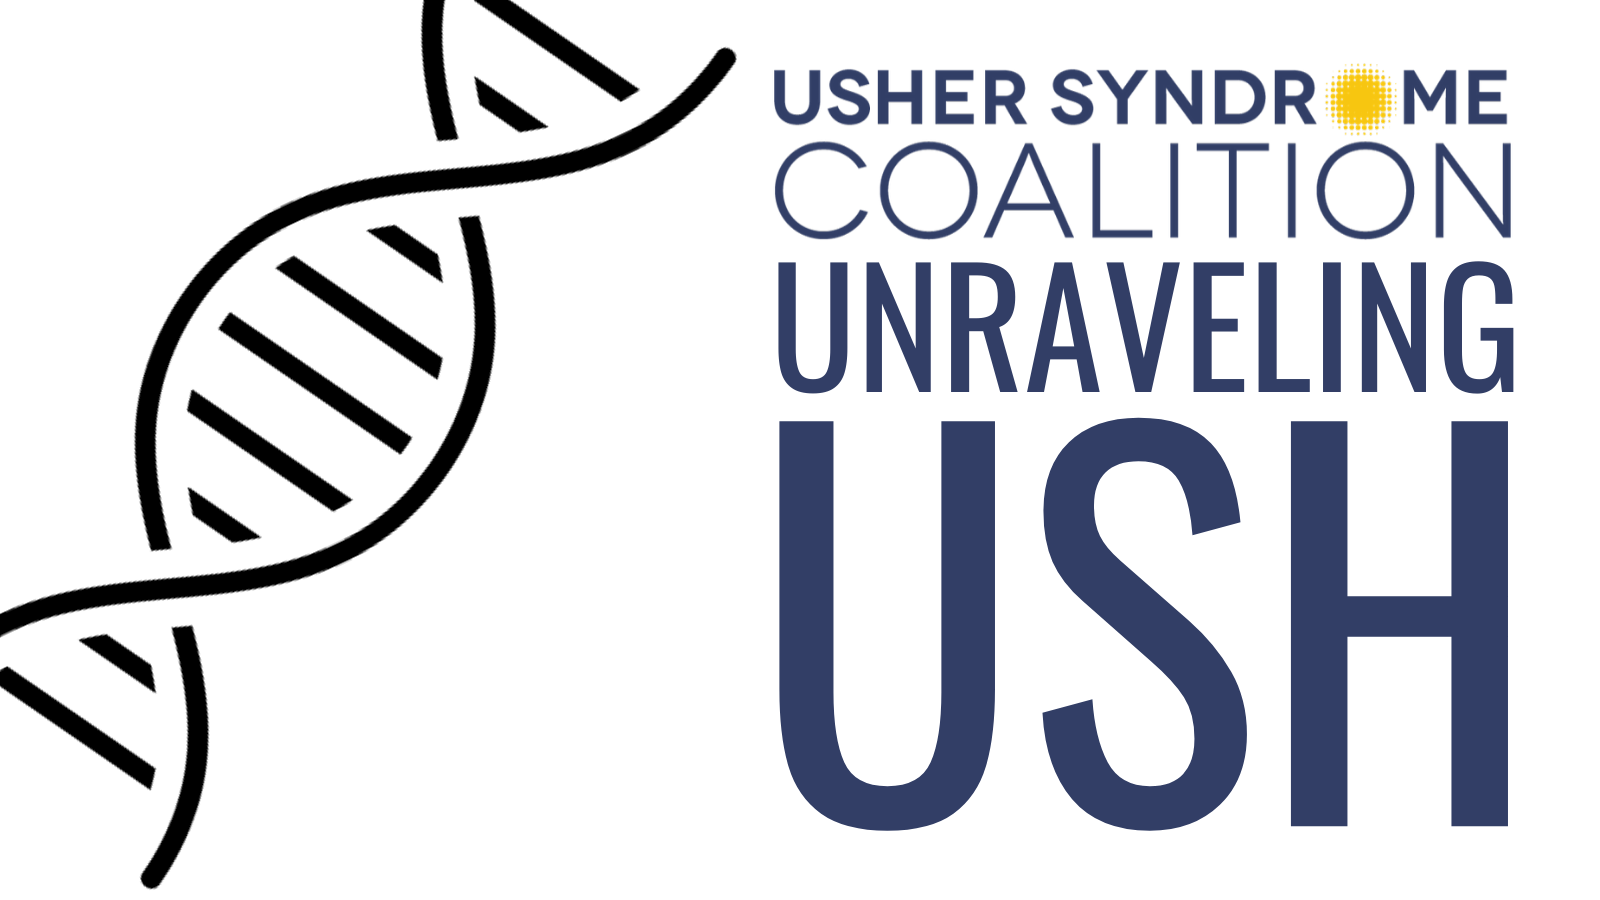 usher syndrome causes